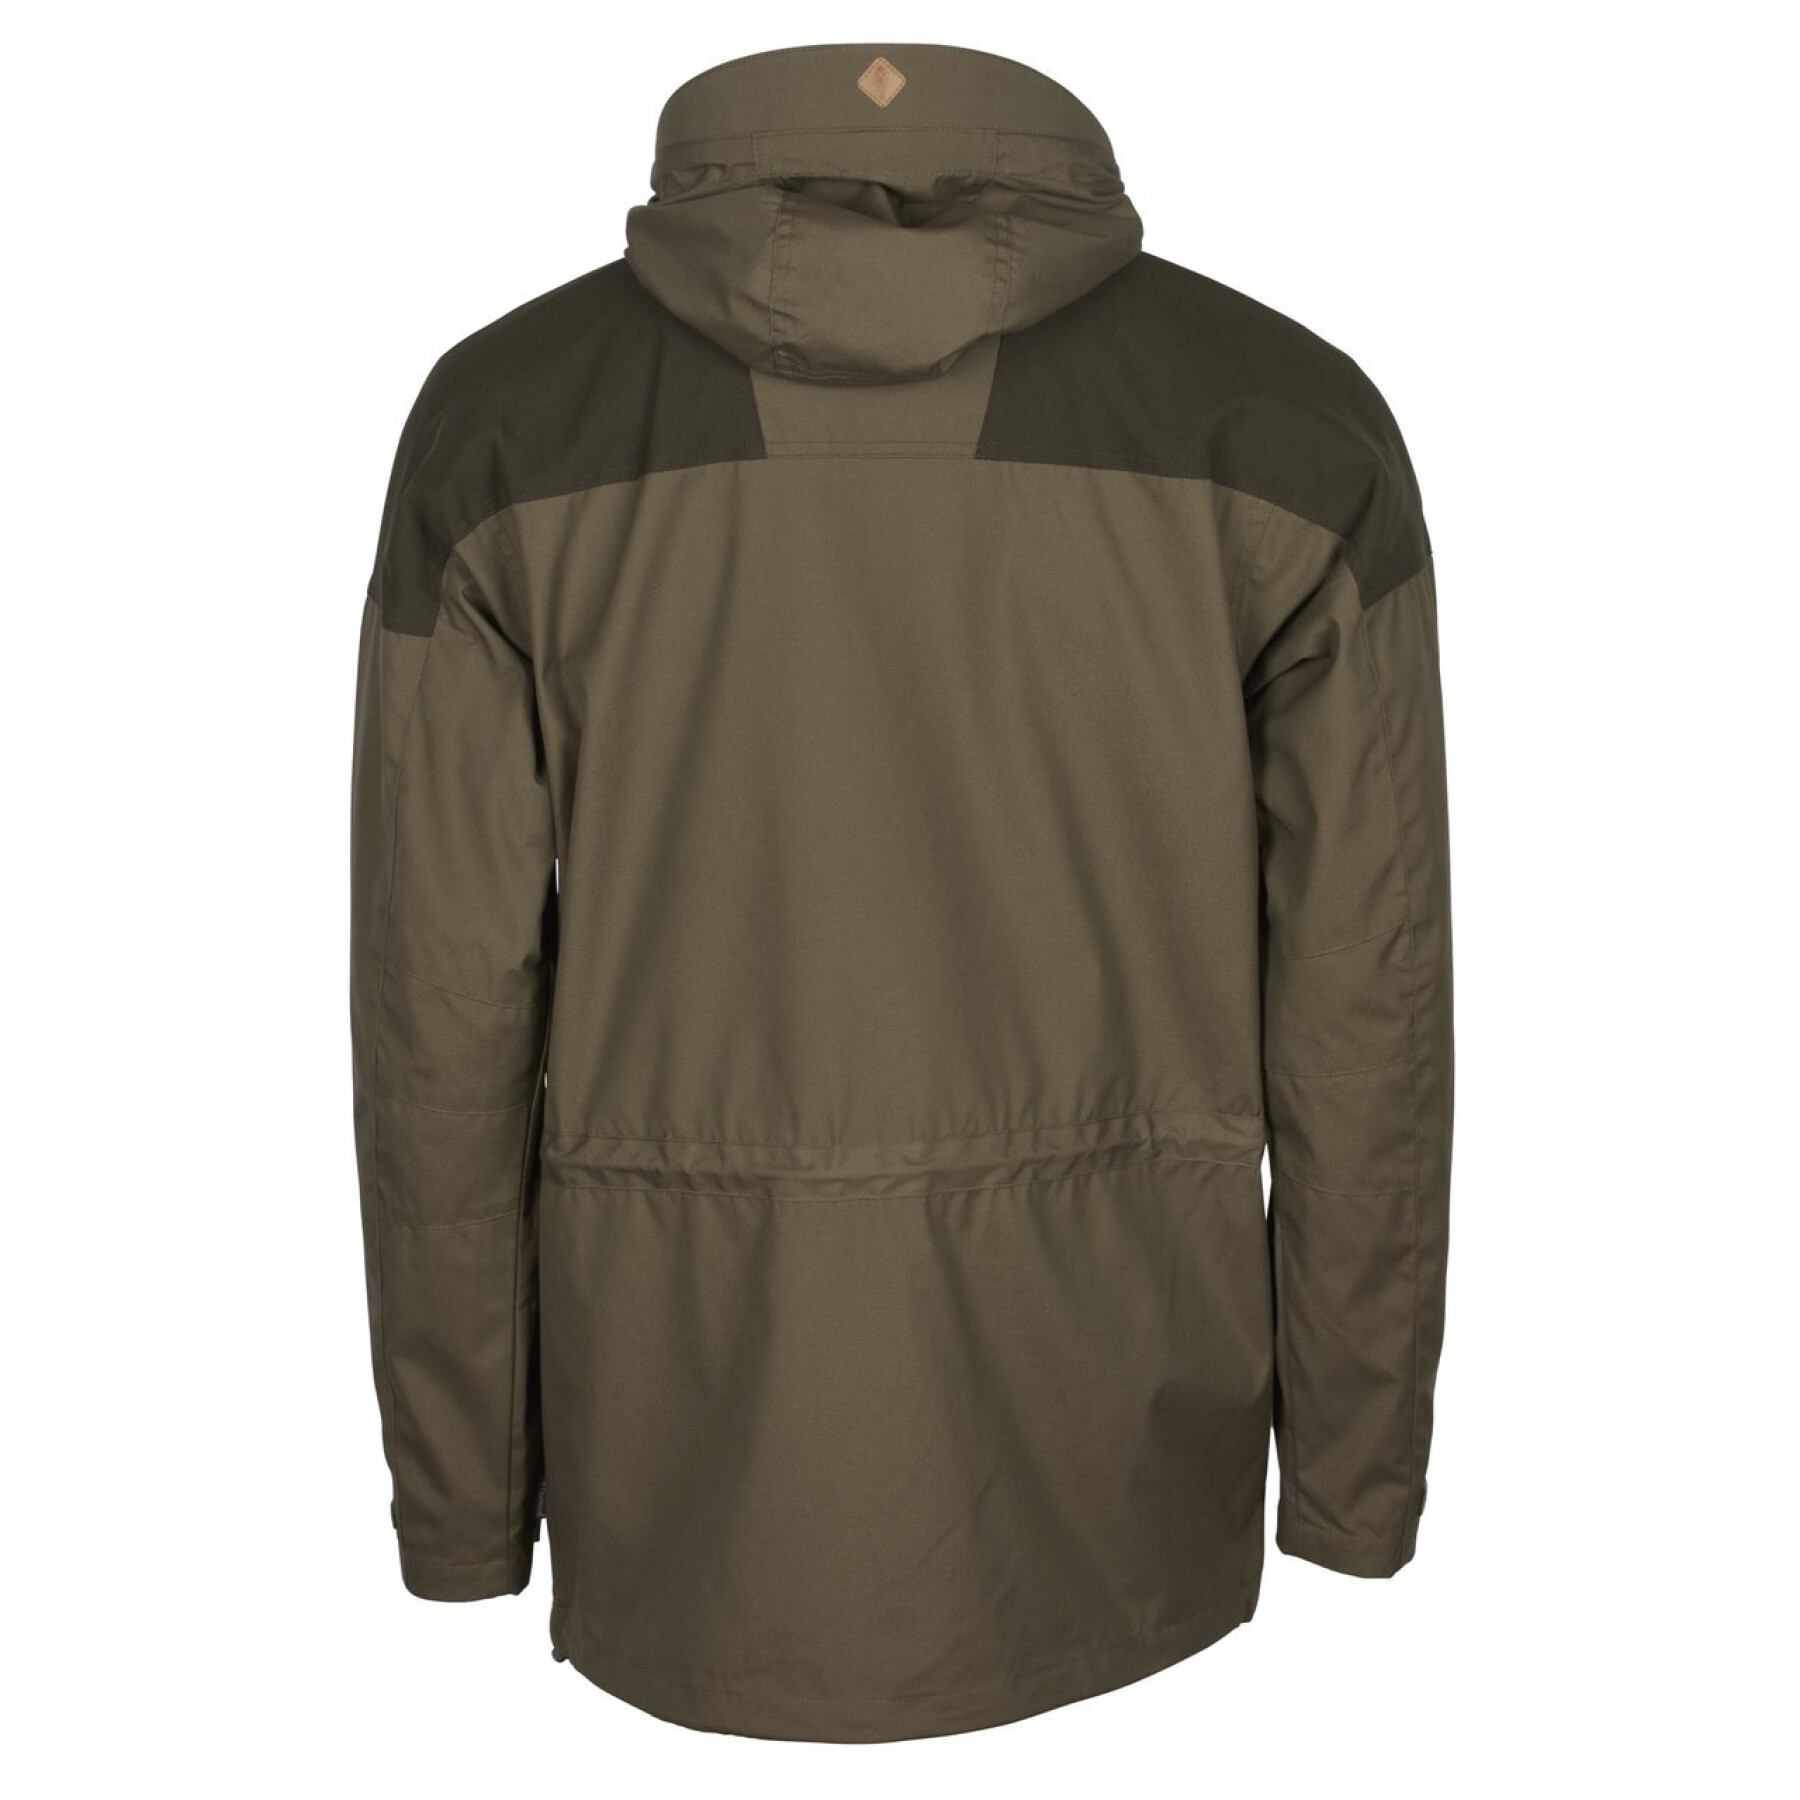 Chaqueta impermeable Pinewood Lappland Extreme 2.0